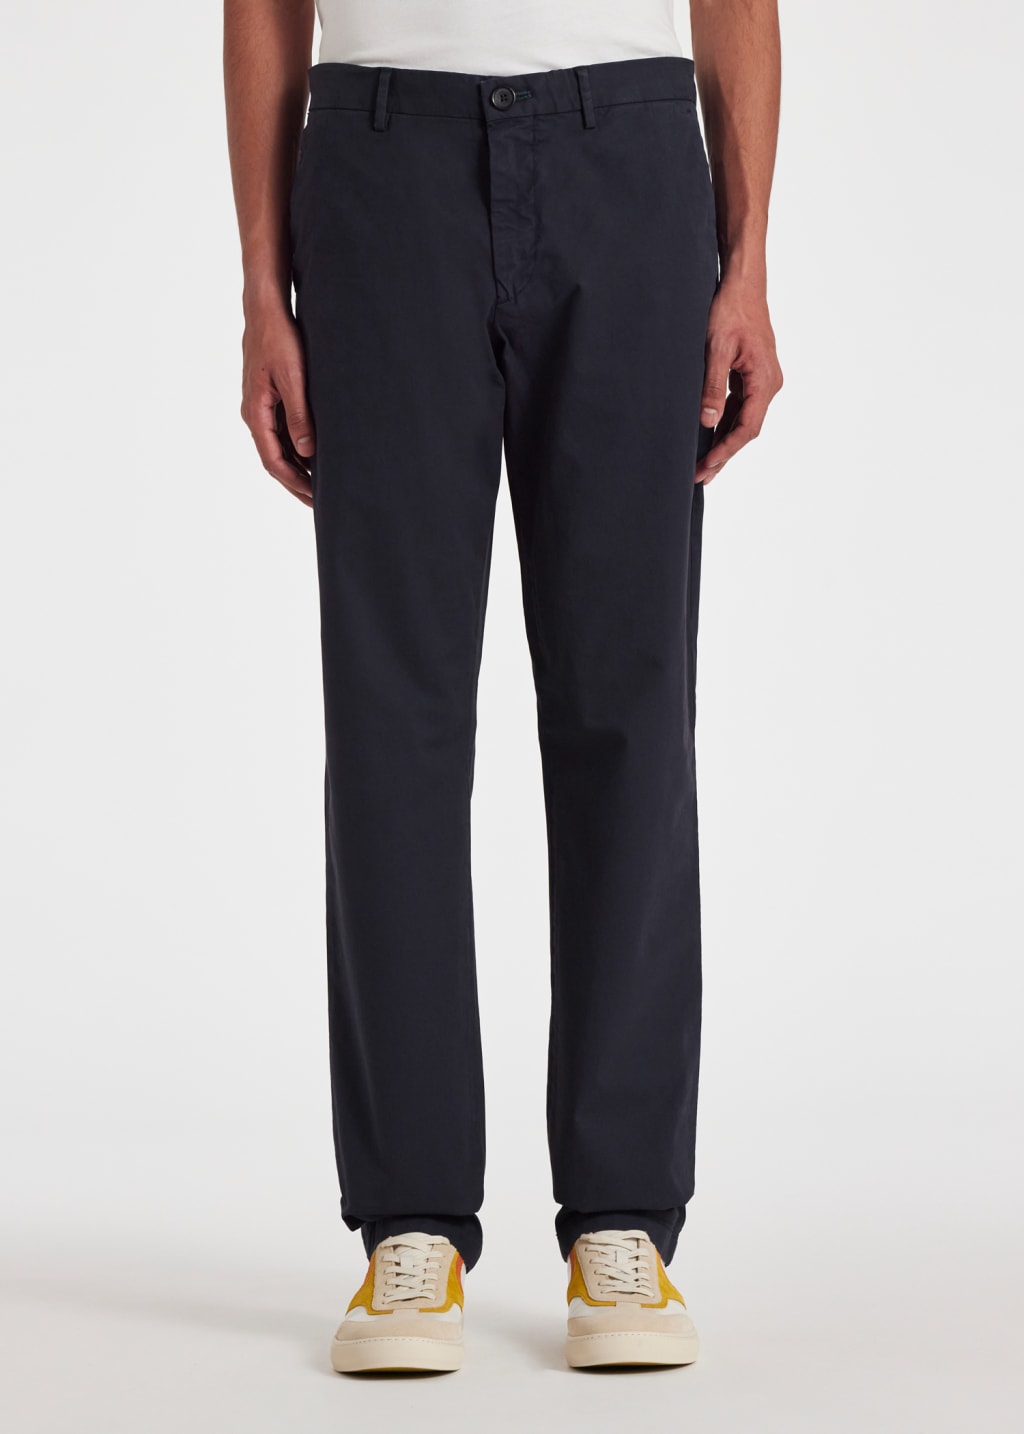 Model View - Navy Mid-Fit 'Broad Stripe Zebra' Chinos Paul Smith